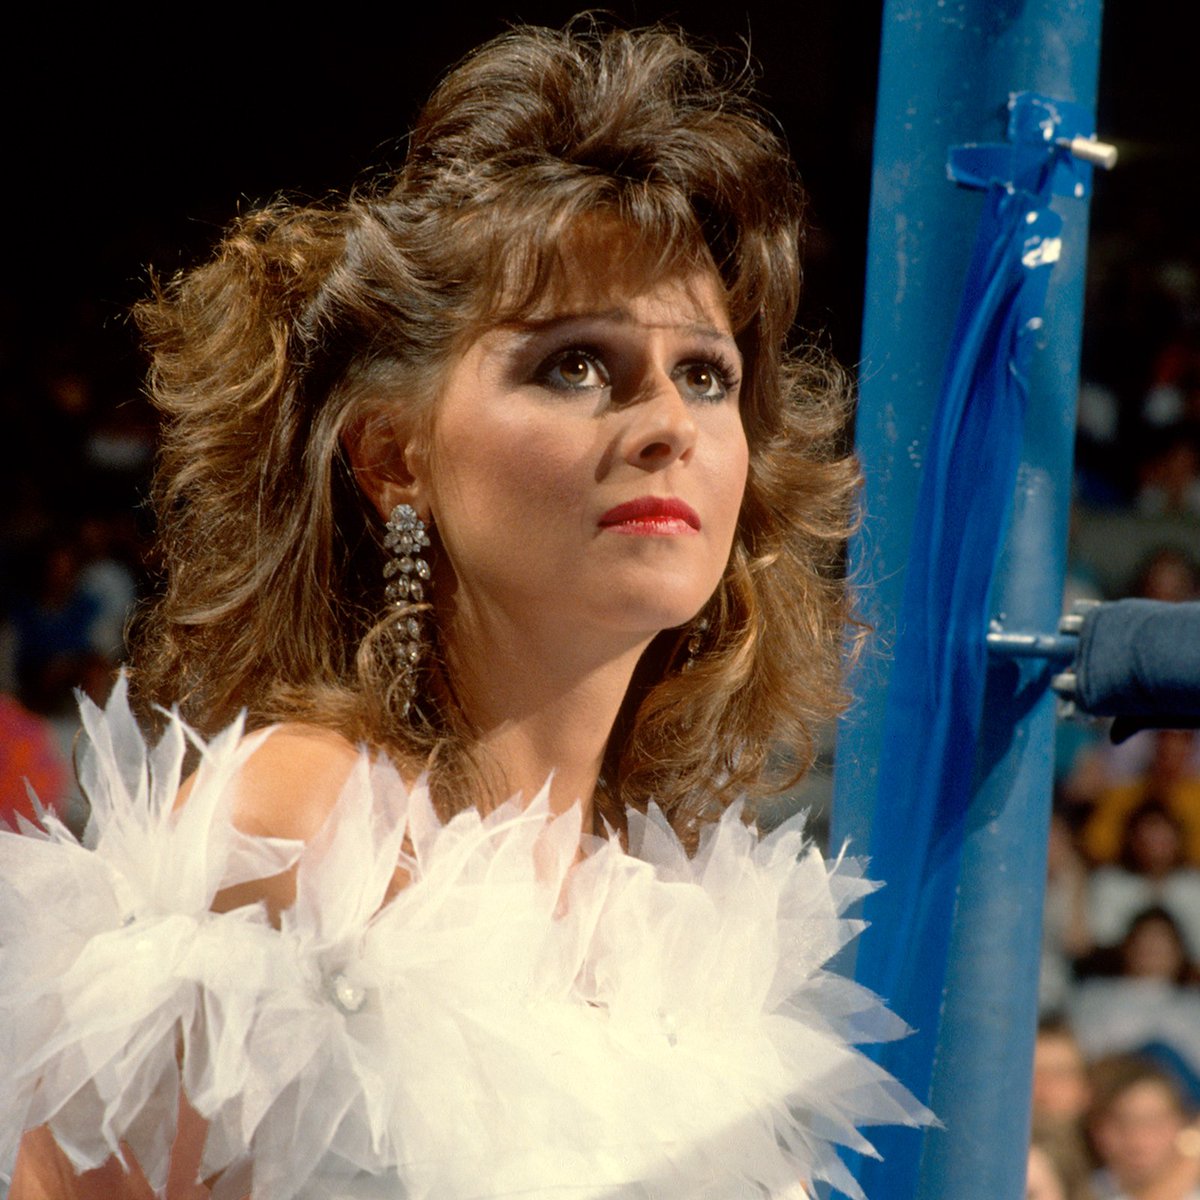 📸 Image from this day in 1988: Miss Elizabeth at ringside during 'Macho Man' Randy Savage's bout with Ted DiBiase at the Mayo Civic Center, Rochester, Minnesota. #WWF #WWE #Wrestling #MissElizabeth